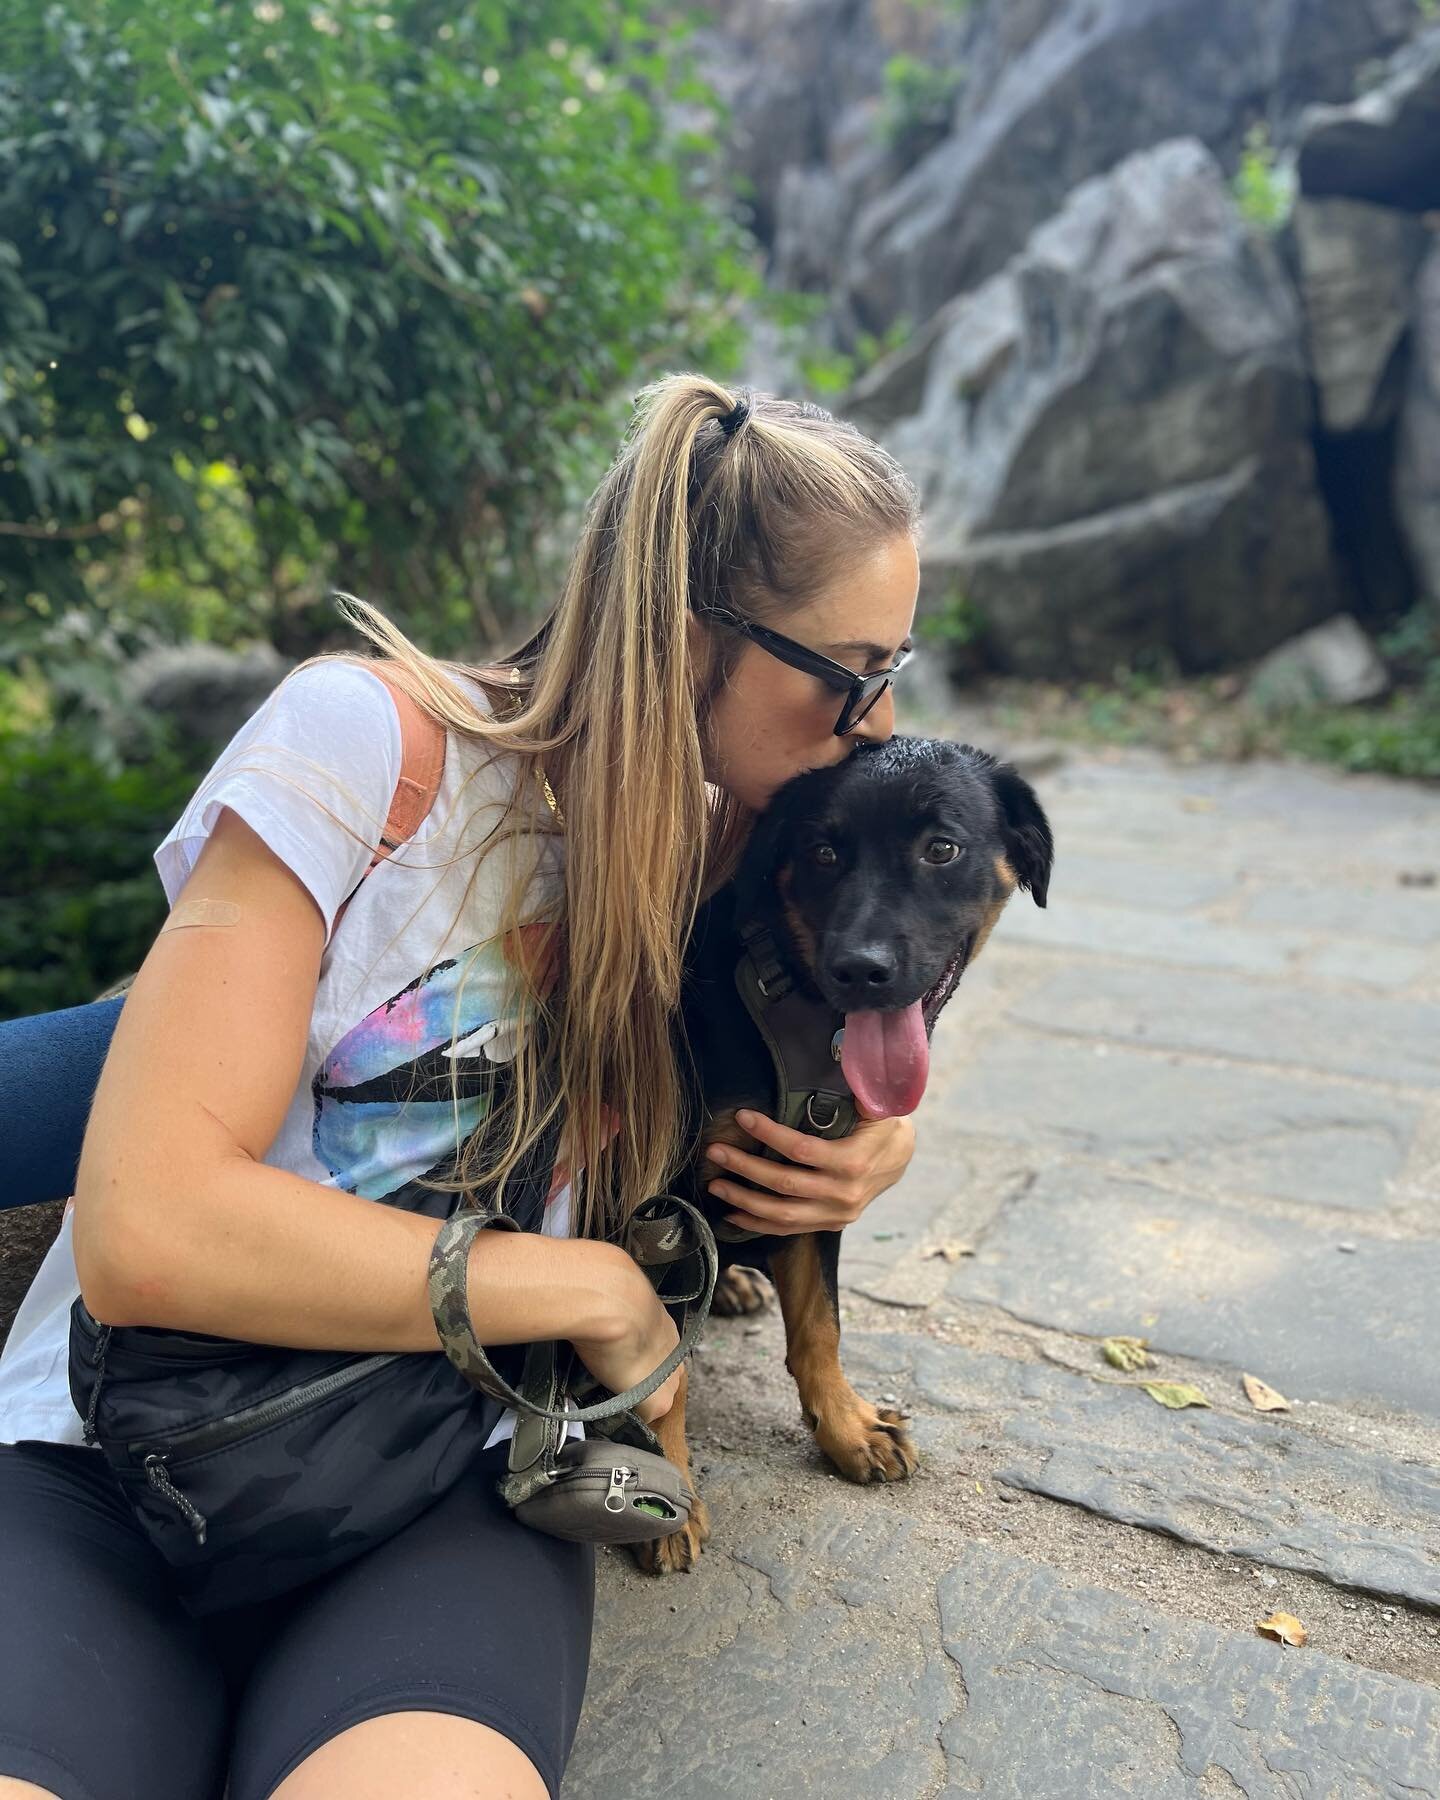 I didn't really think that I would ever get a dog while still technically a single (not married) person, living on my own in New York City. Sure, I always wanted one - I'd given this thought more than a few times - but overwhelmingly, it seemed way t